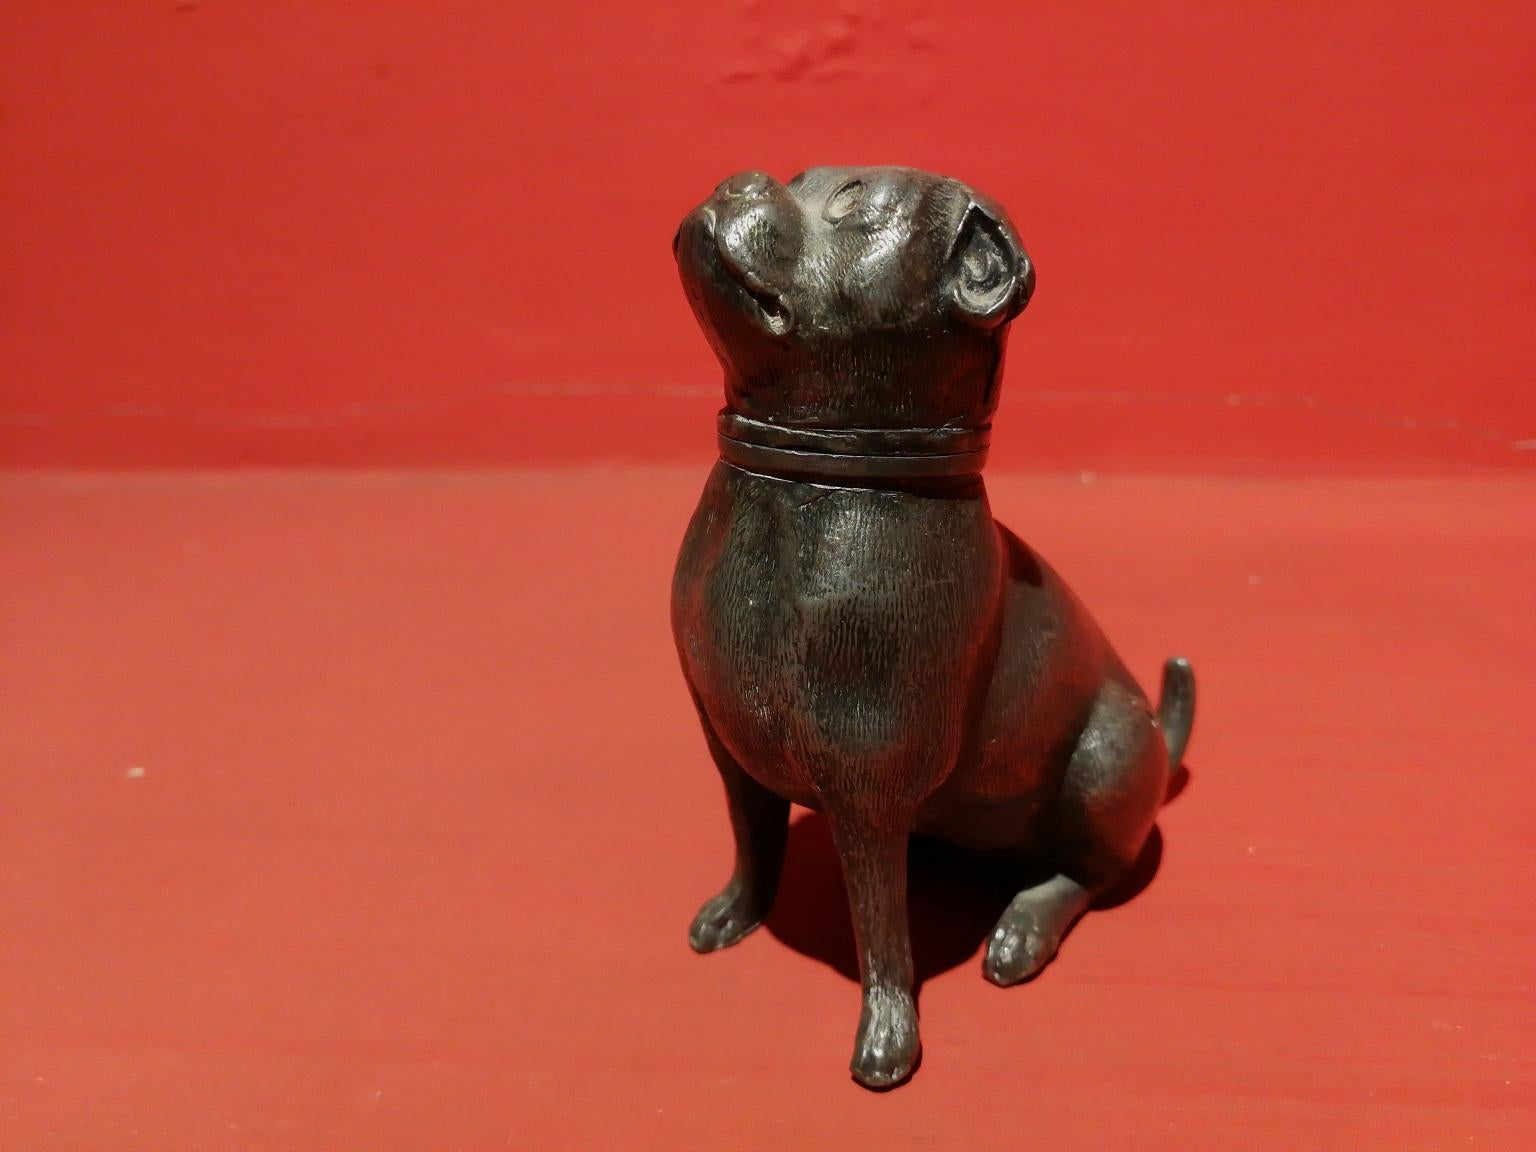 Four Animal Figurative Statues 19-20 century various metal medium - Sculpture by Unknown